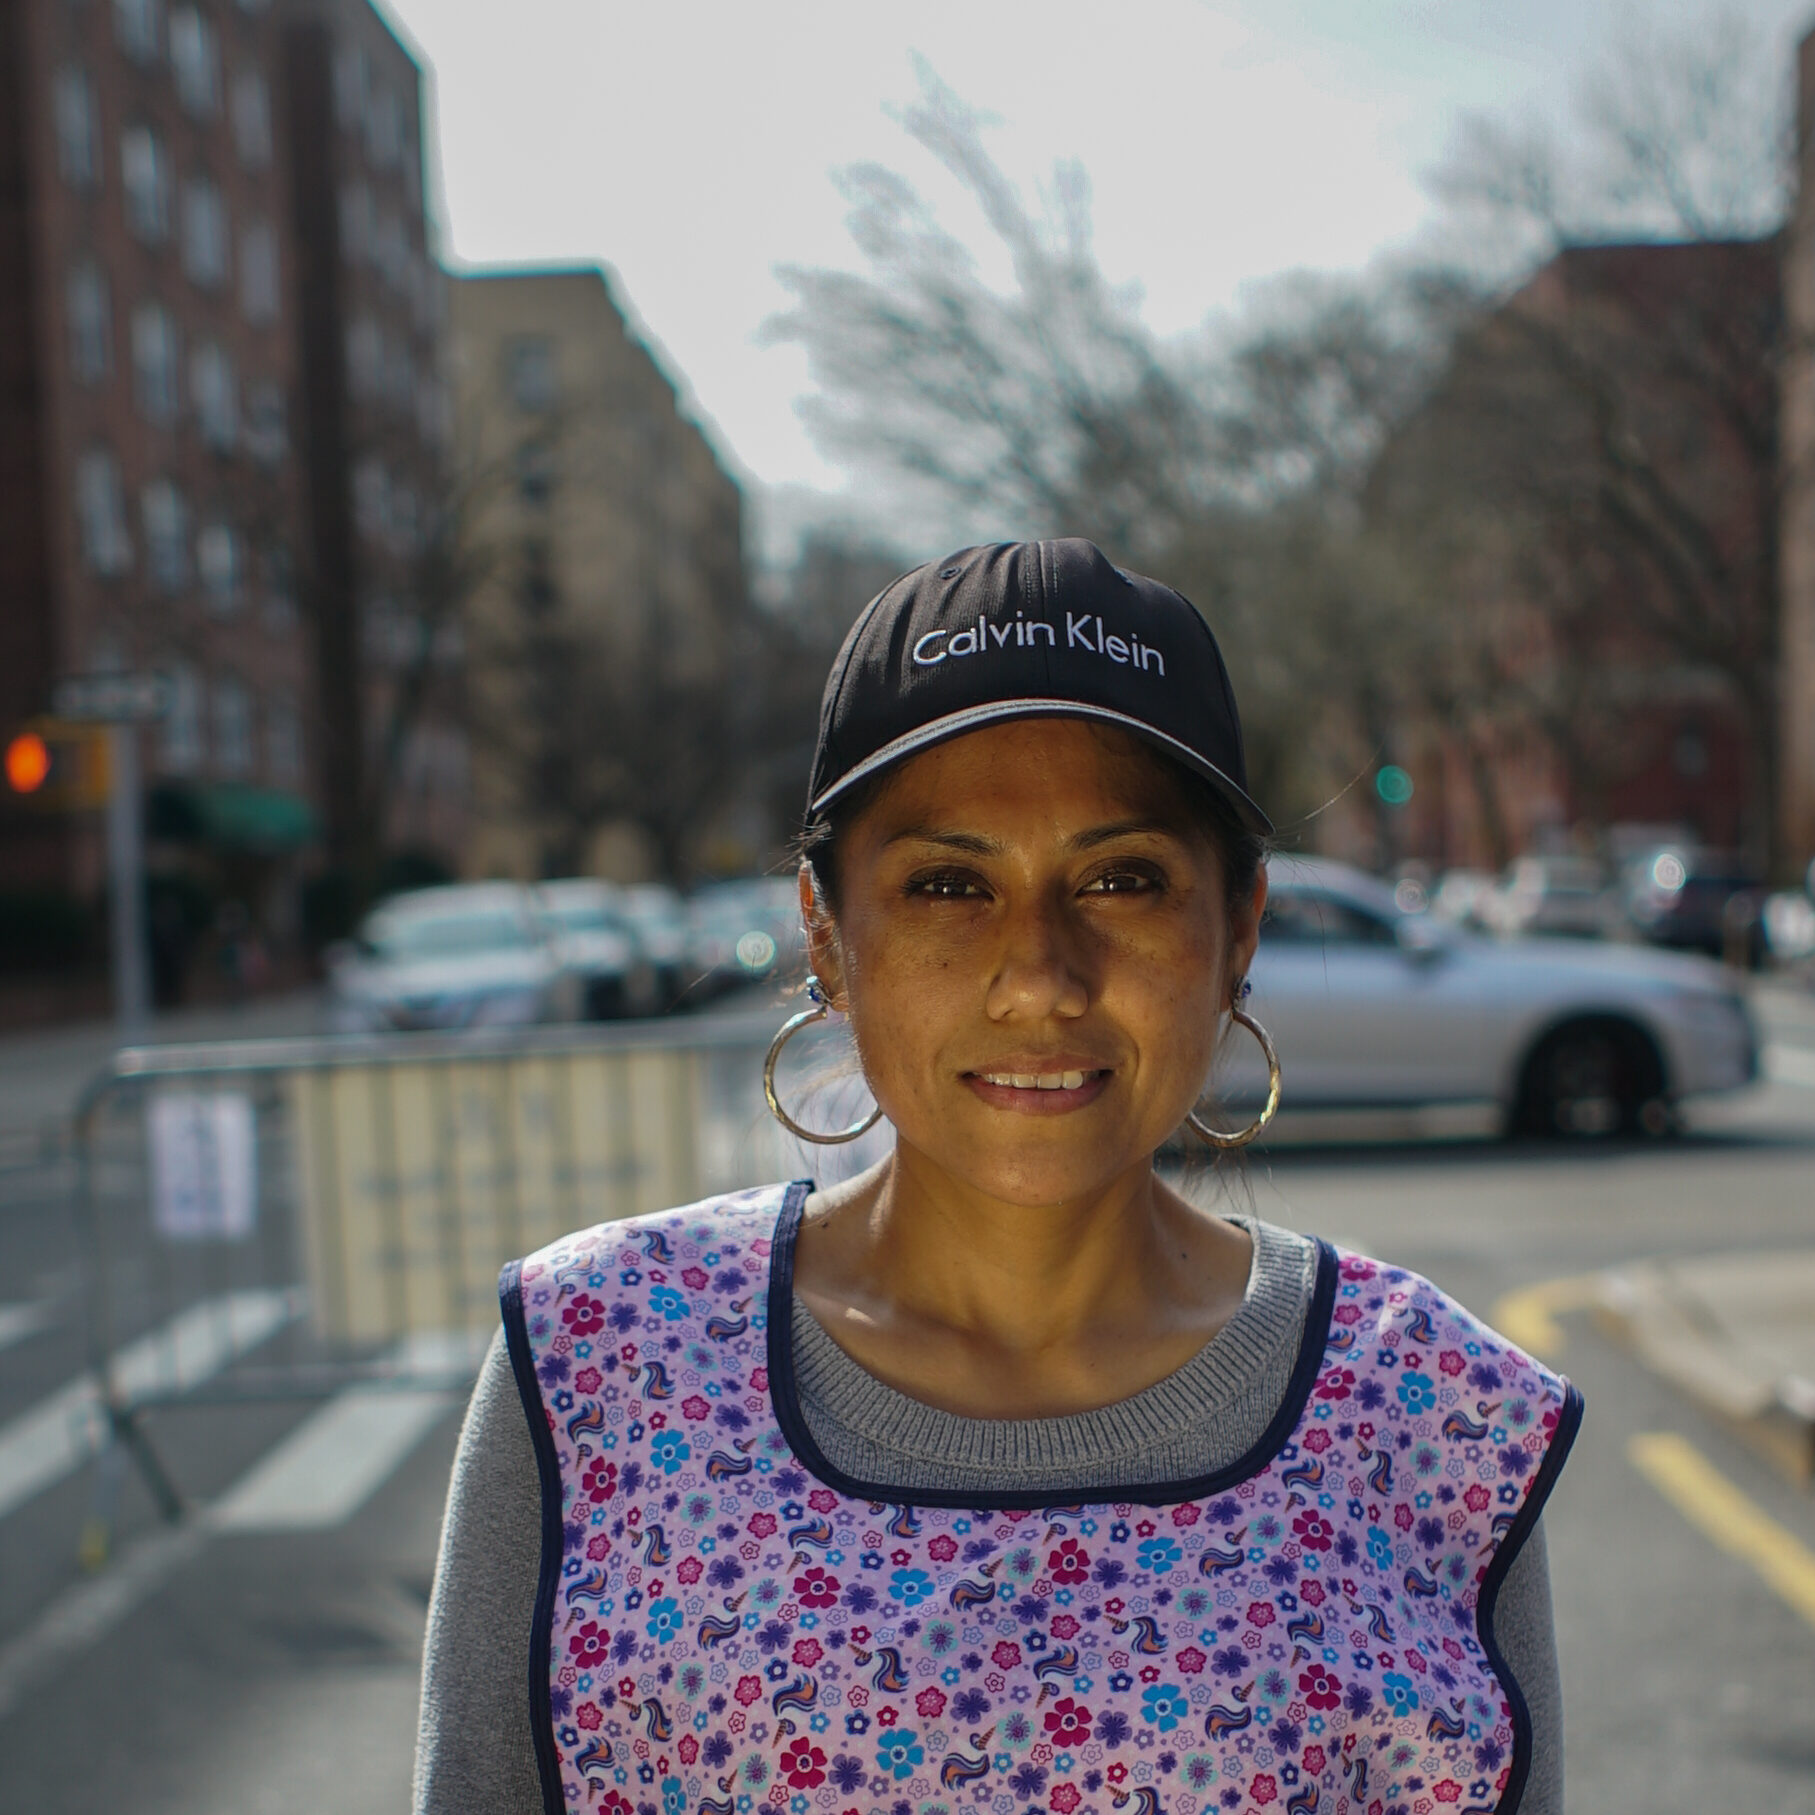 Janet Bravo stands on 34th Avenue, looking into the camera, wearing a baseball cap and apron.